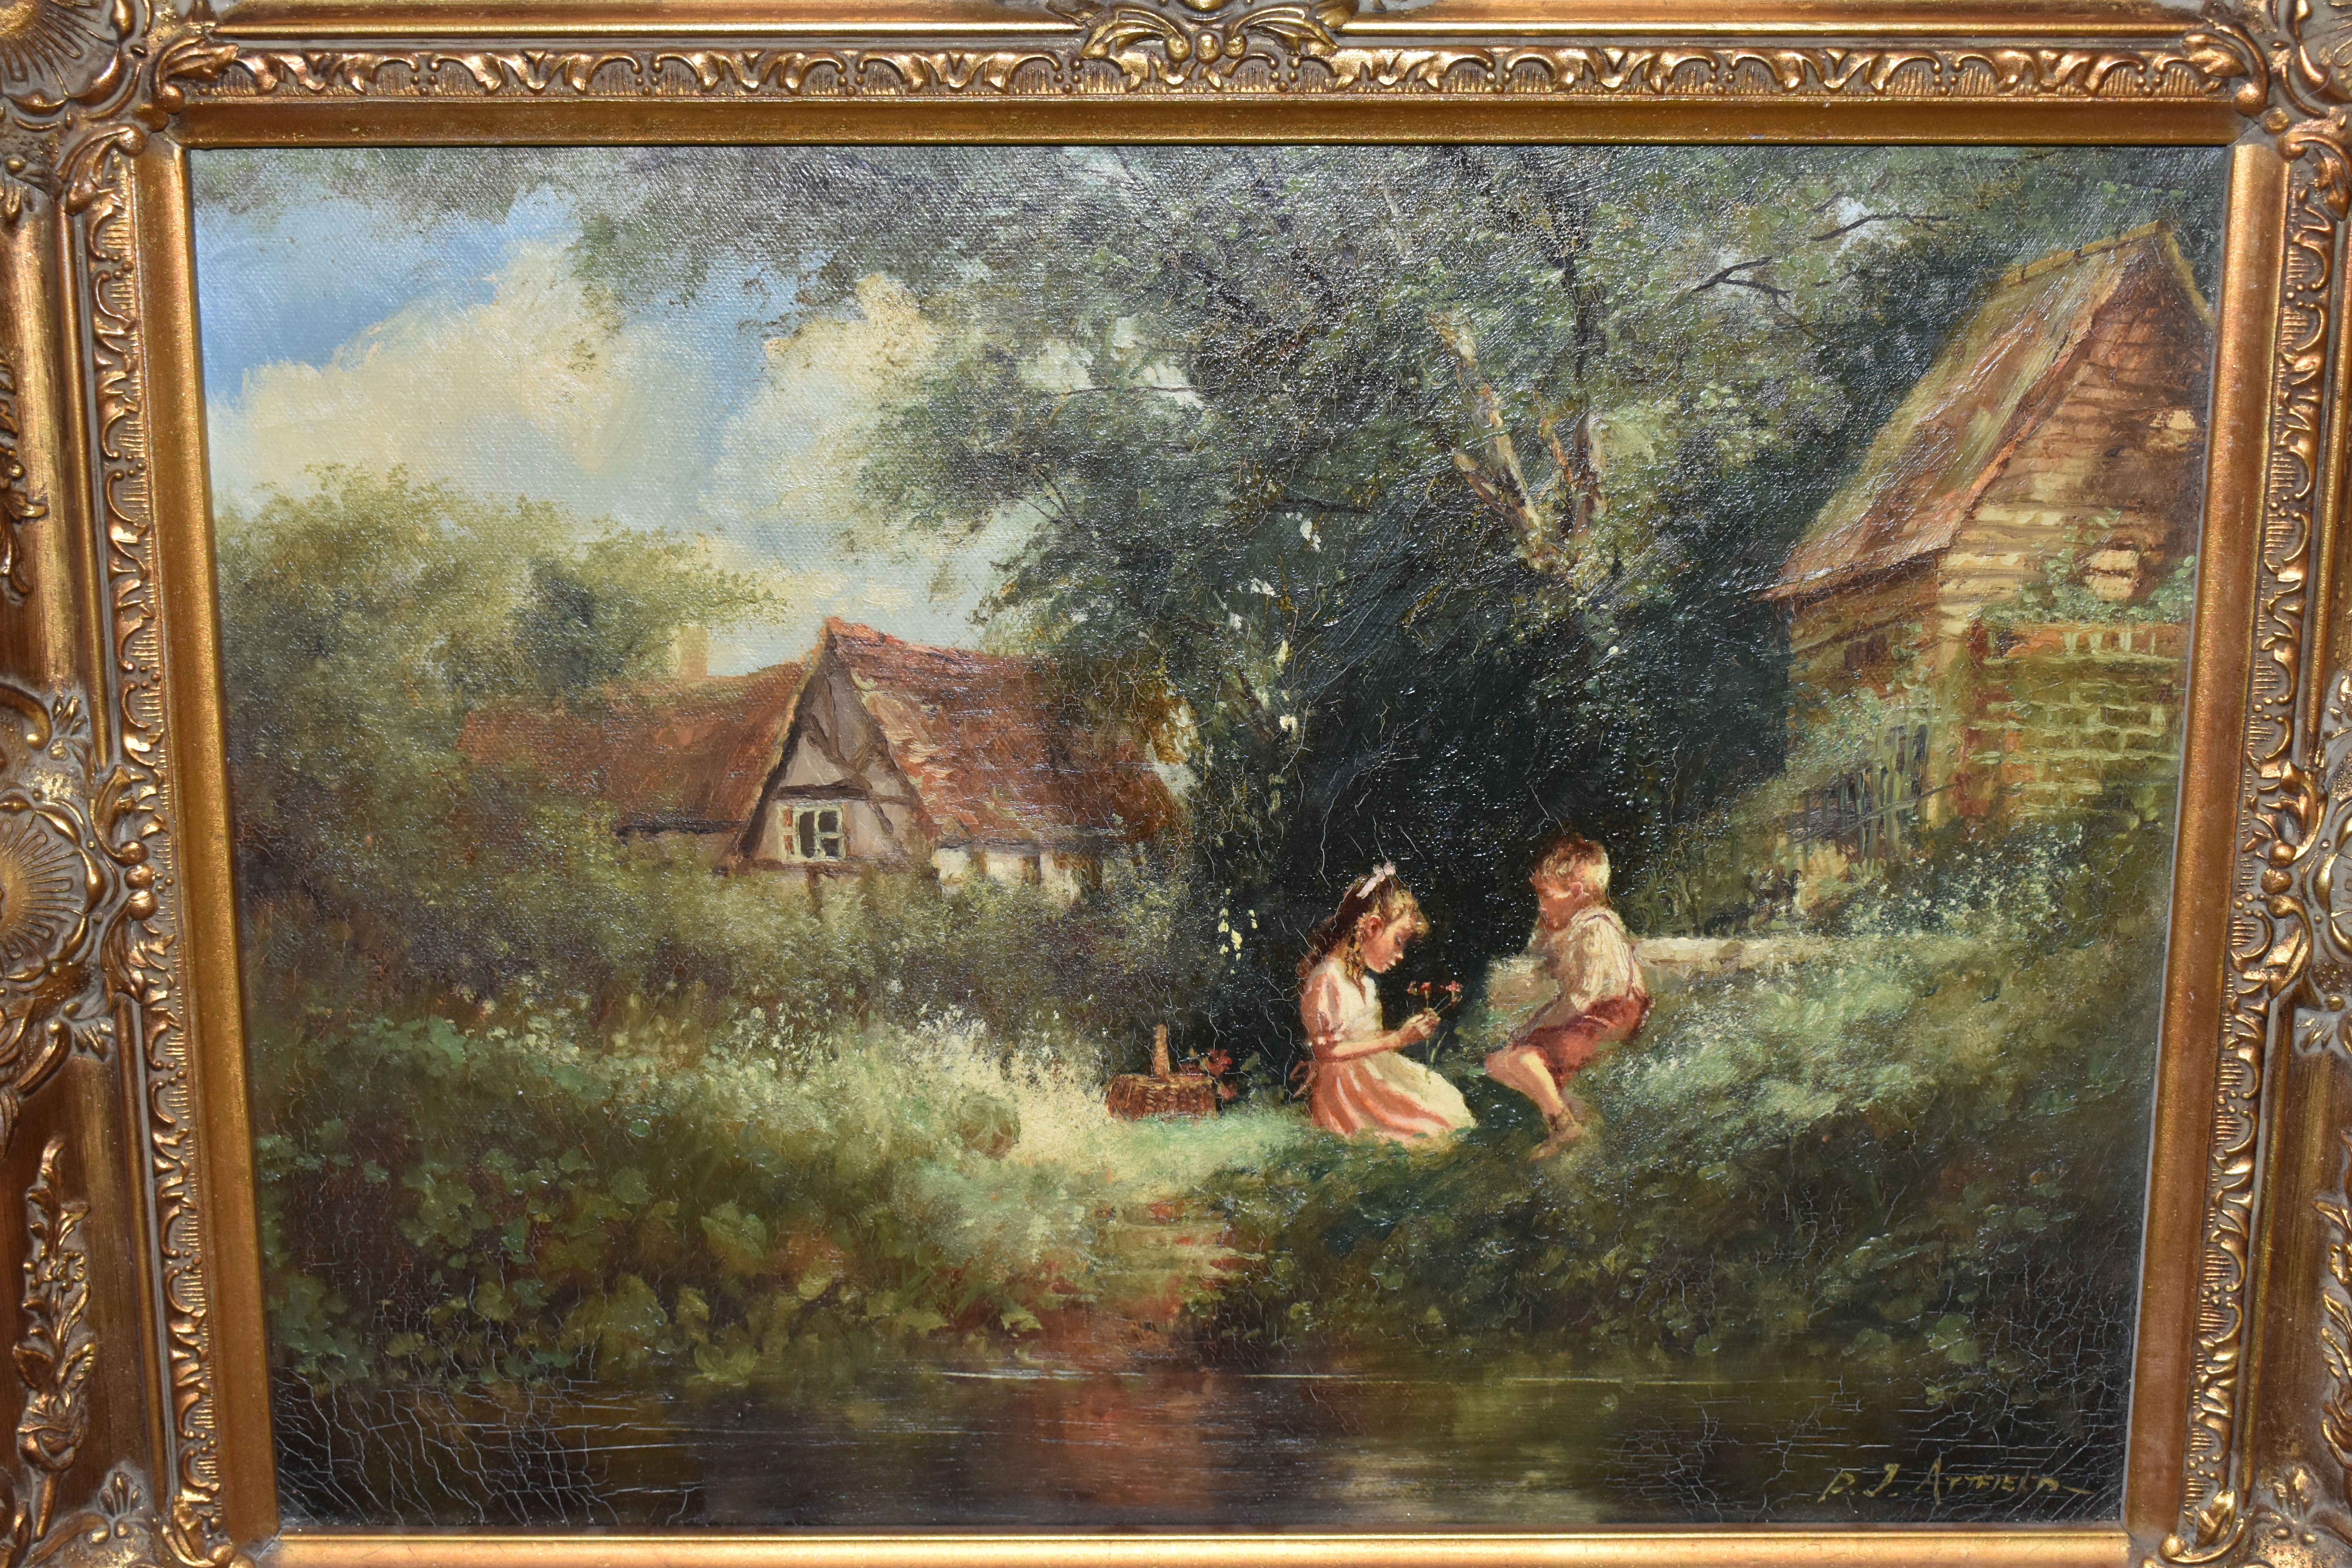 PAUL J ATTFIELD (BRITISH 1950) A YOUNG GIRL AND BOY BESIDE A RIVER, a cottage is surrounded by trees - Image 2 of 5